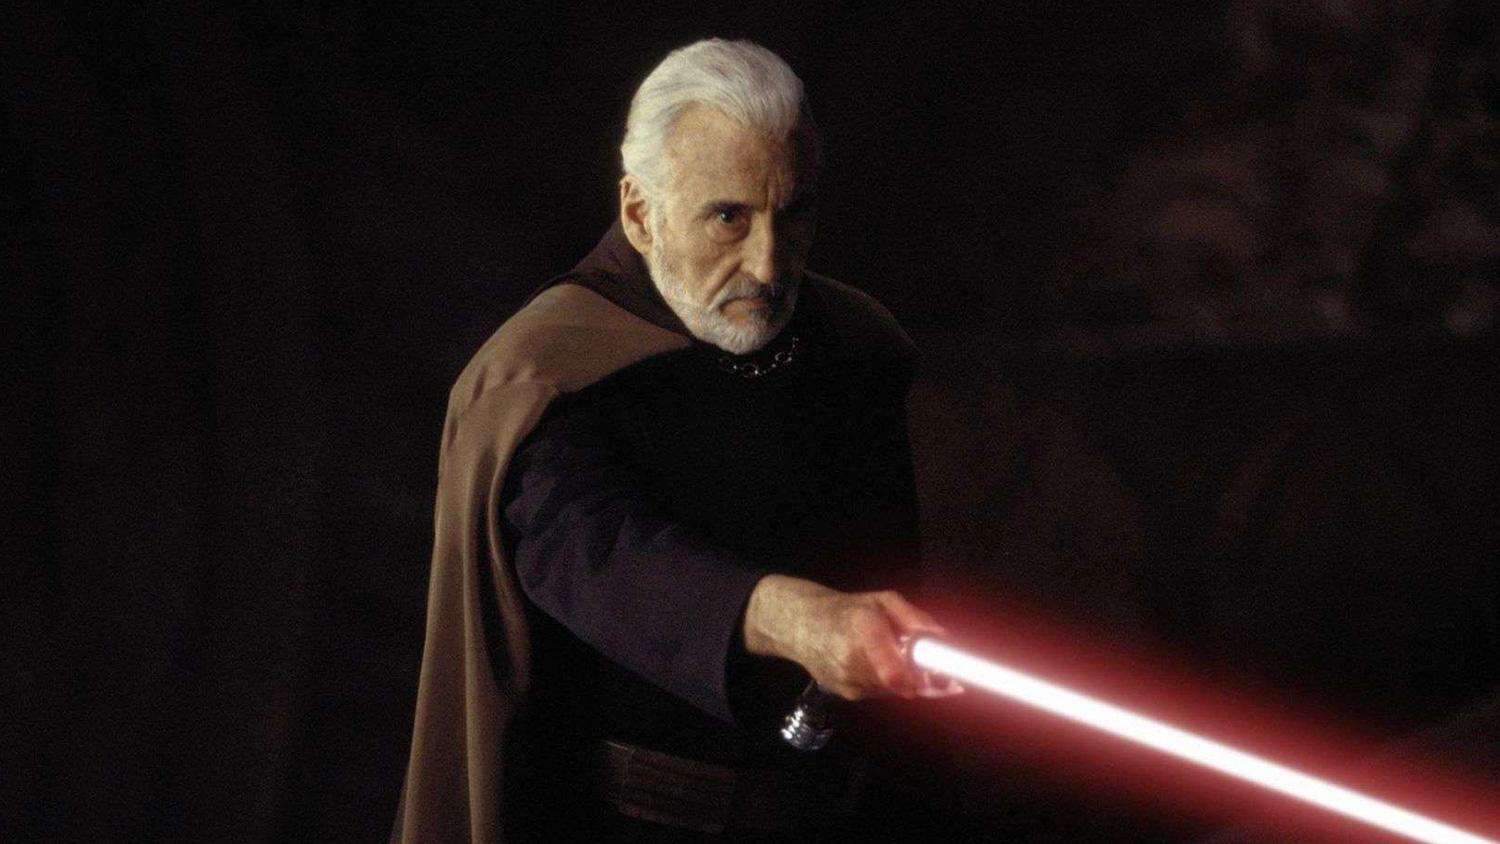 Christopher Lee as Count Dooku from the "Star Wars" franchise.